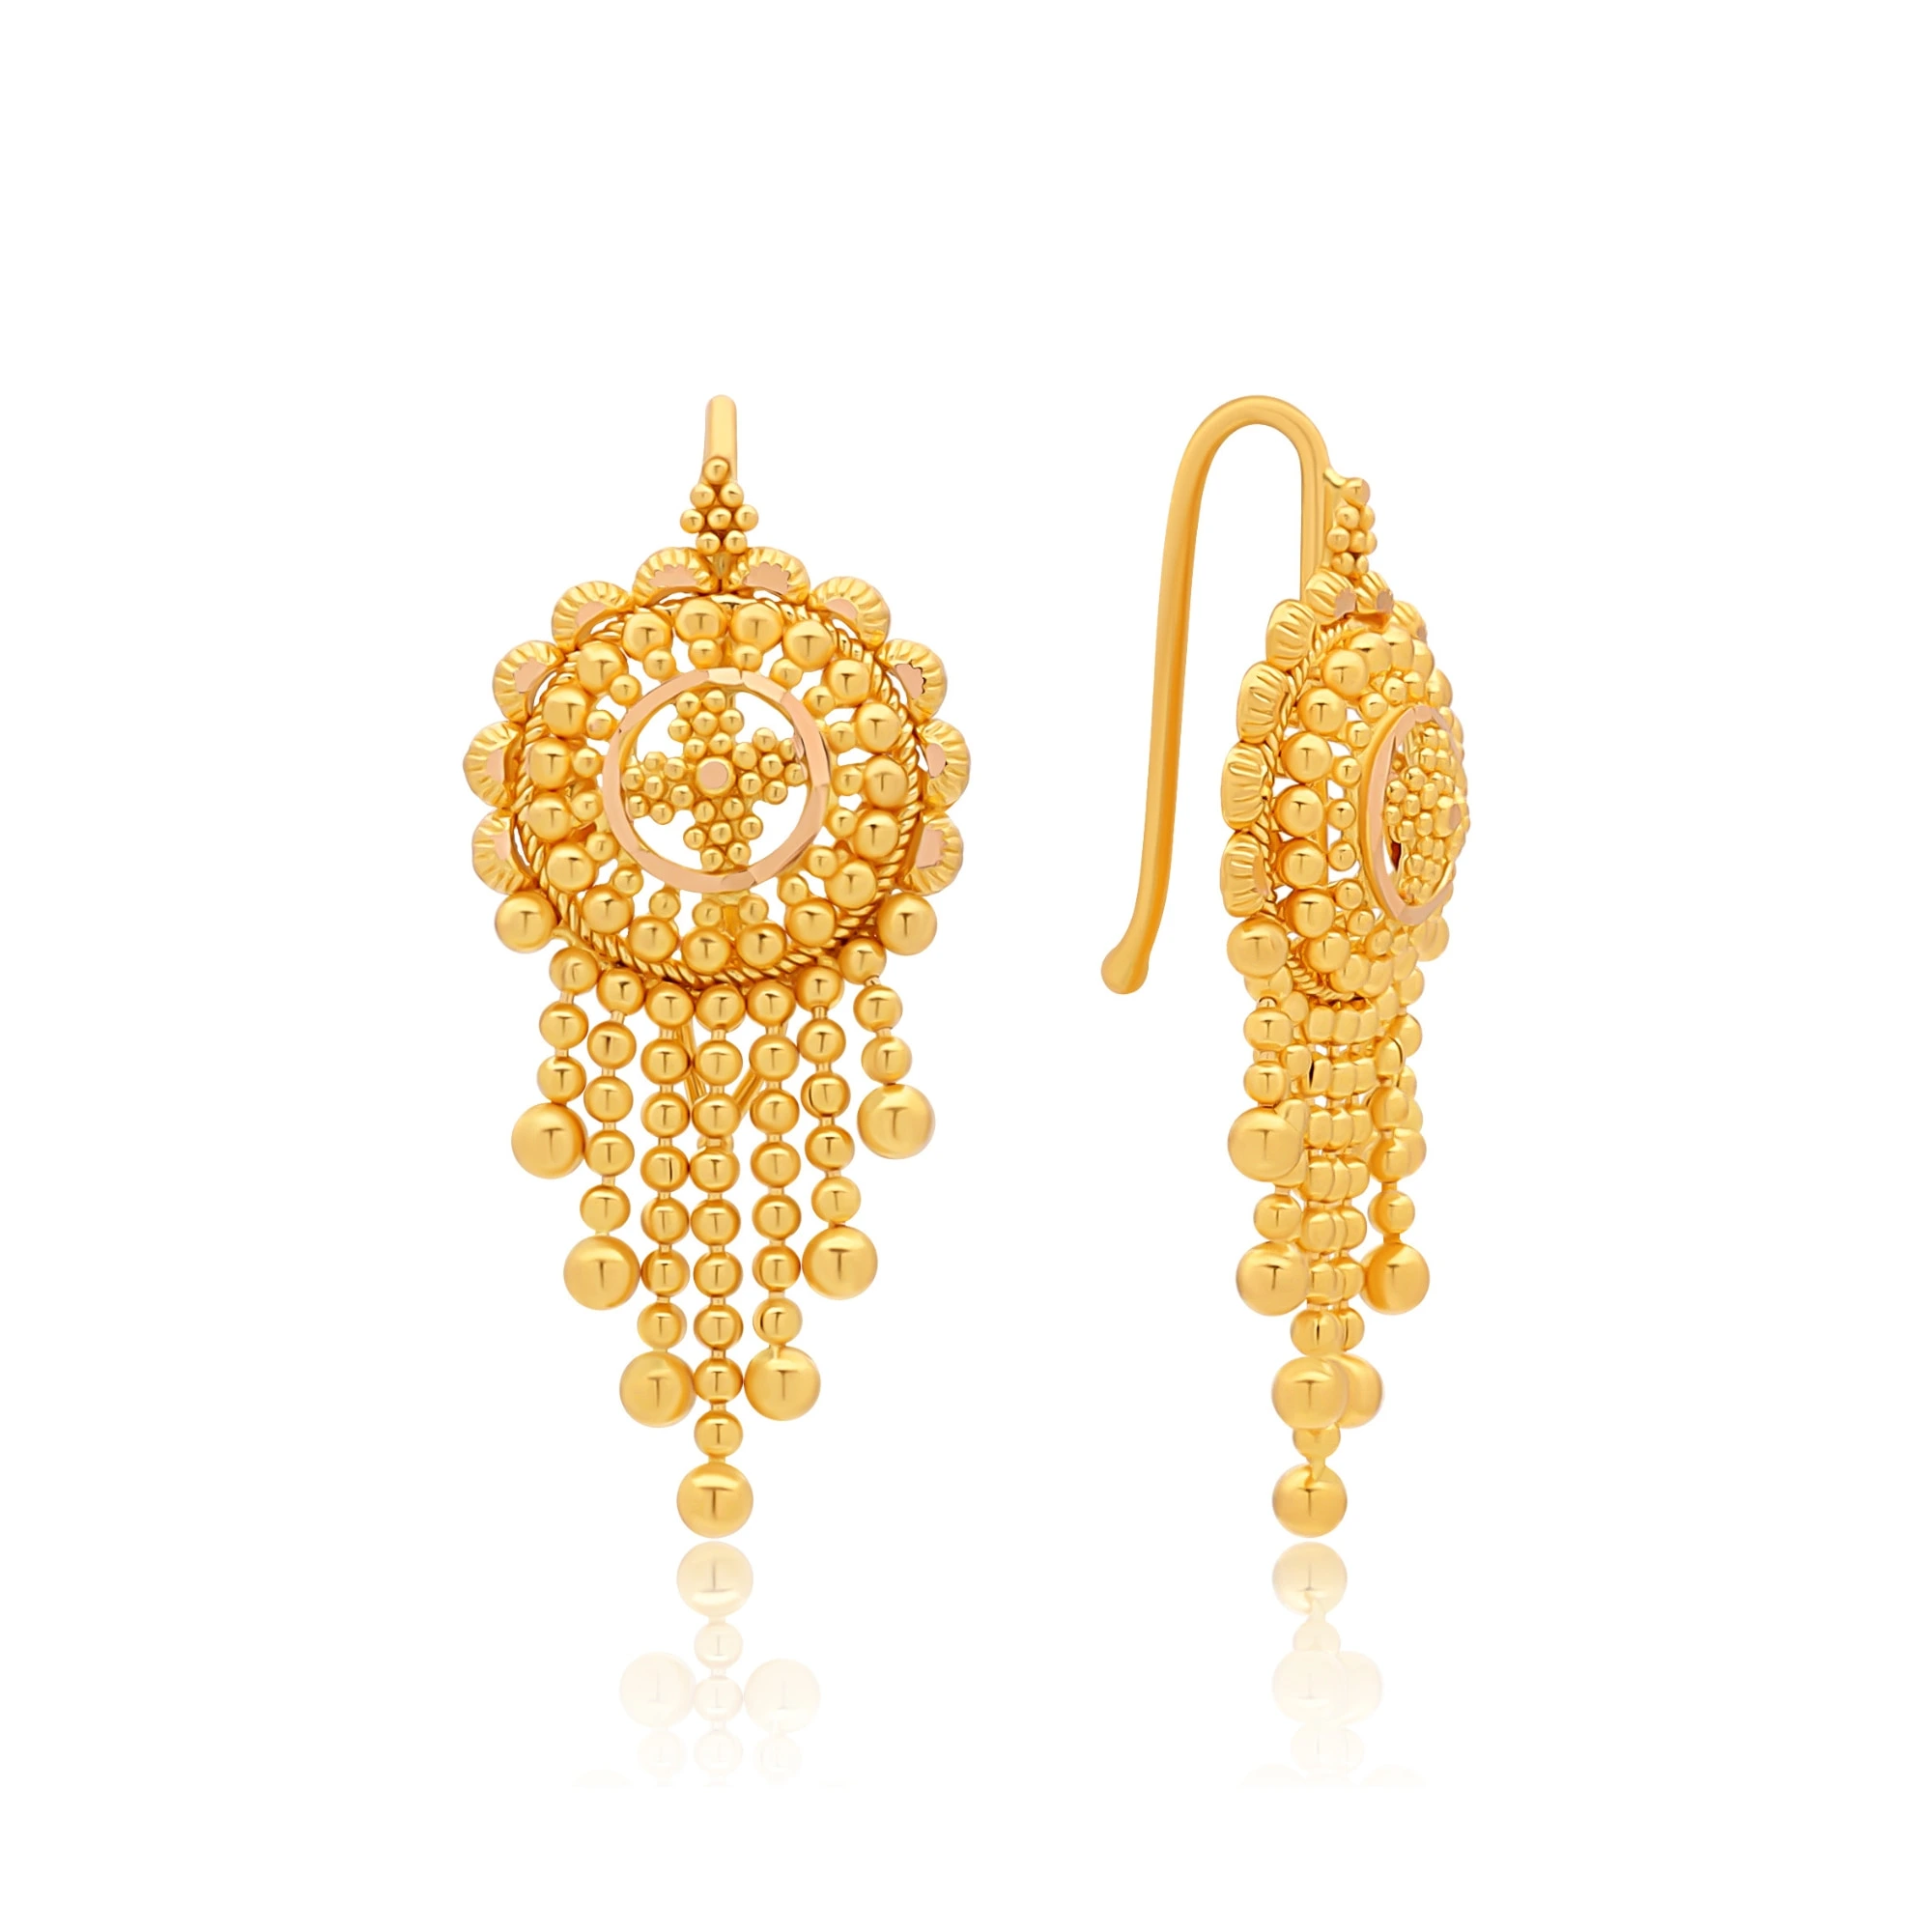 Latest Light Weight 24k Gold Dangle Earring Designs of 2021 - Indian  Fashion Trends - YouTube